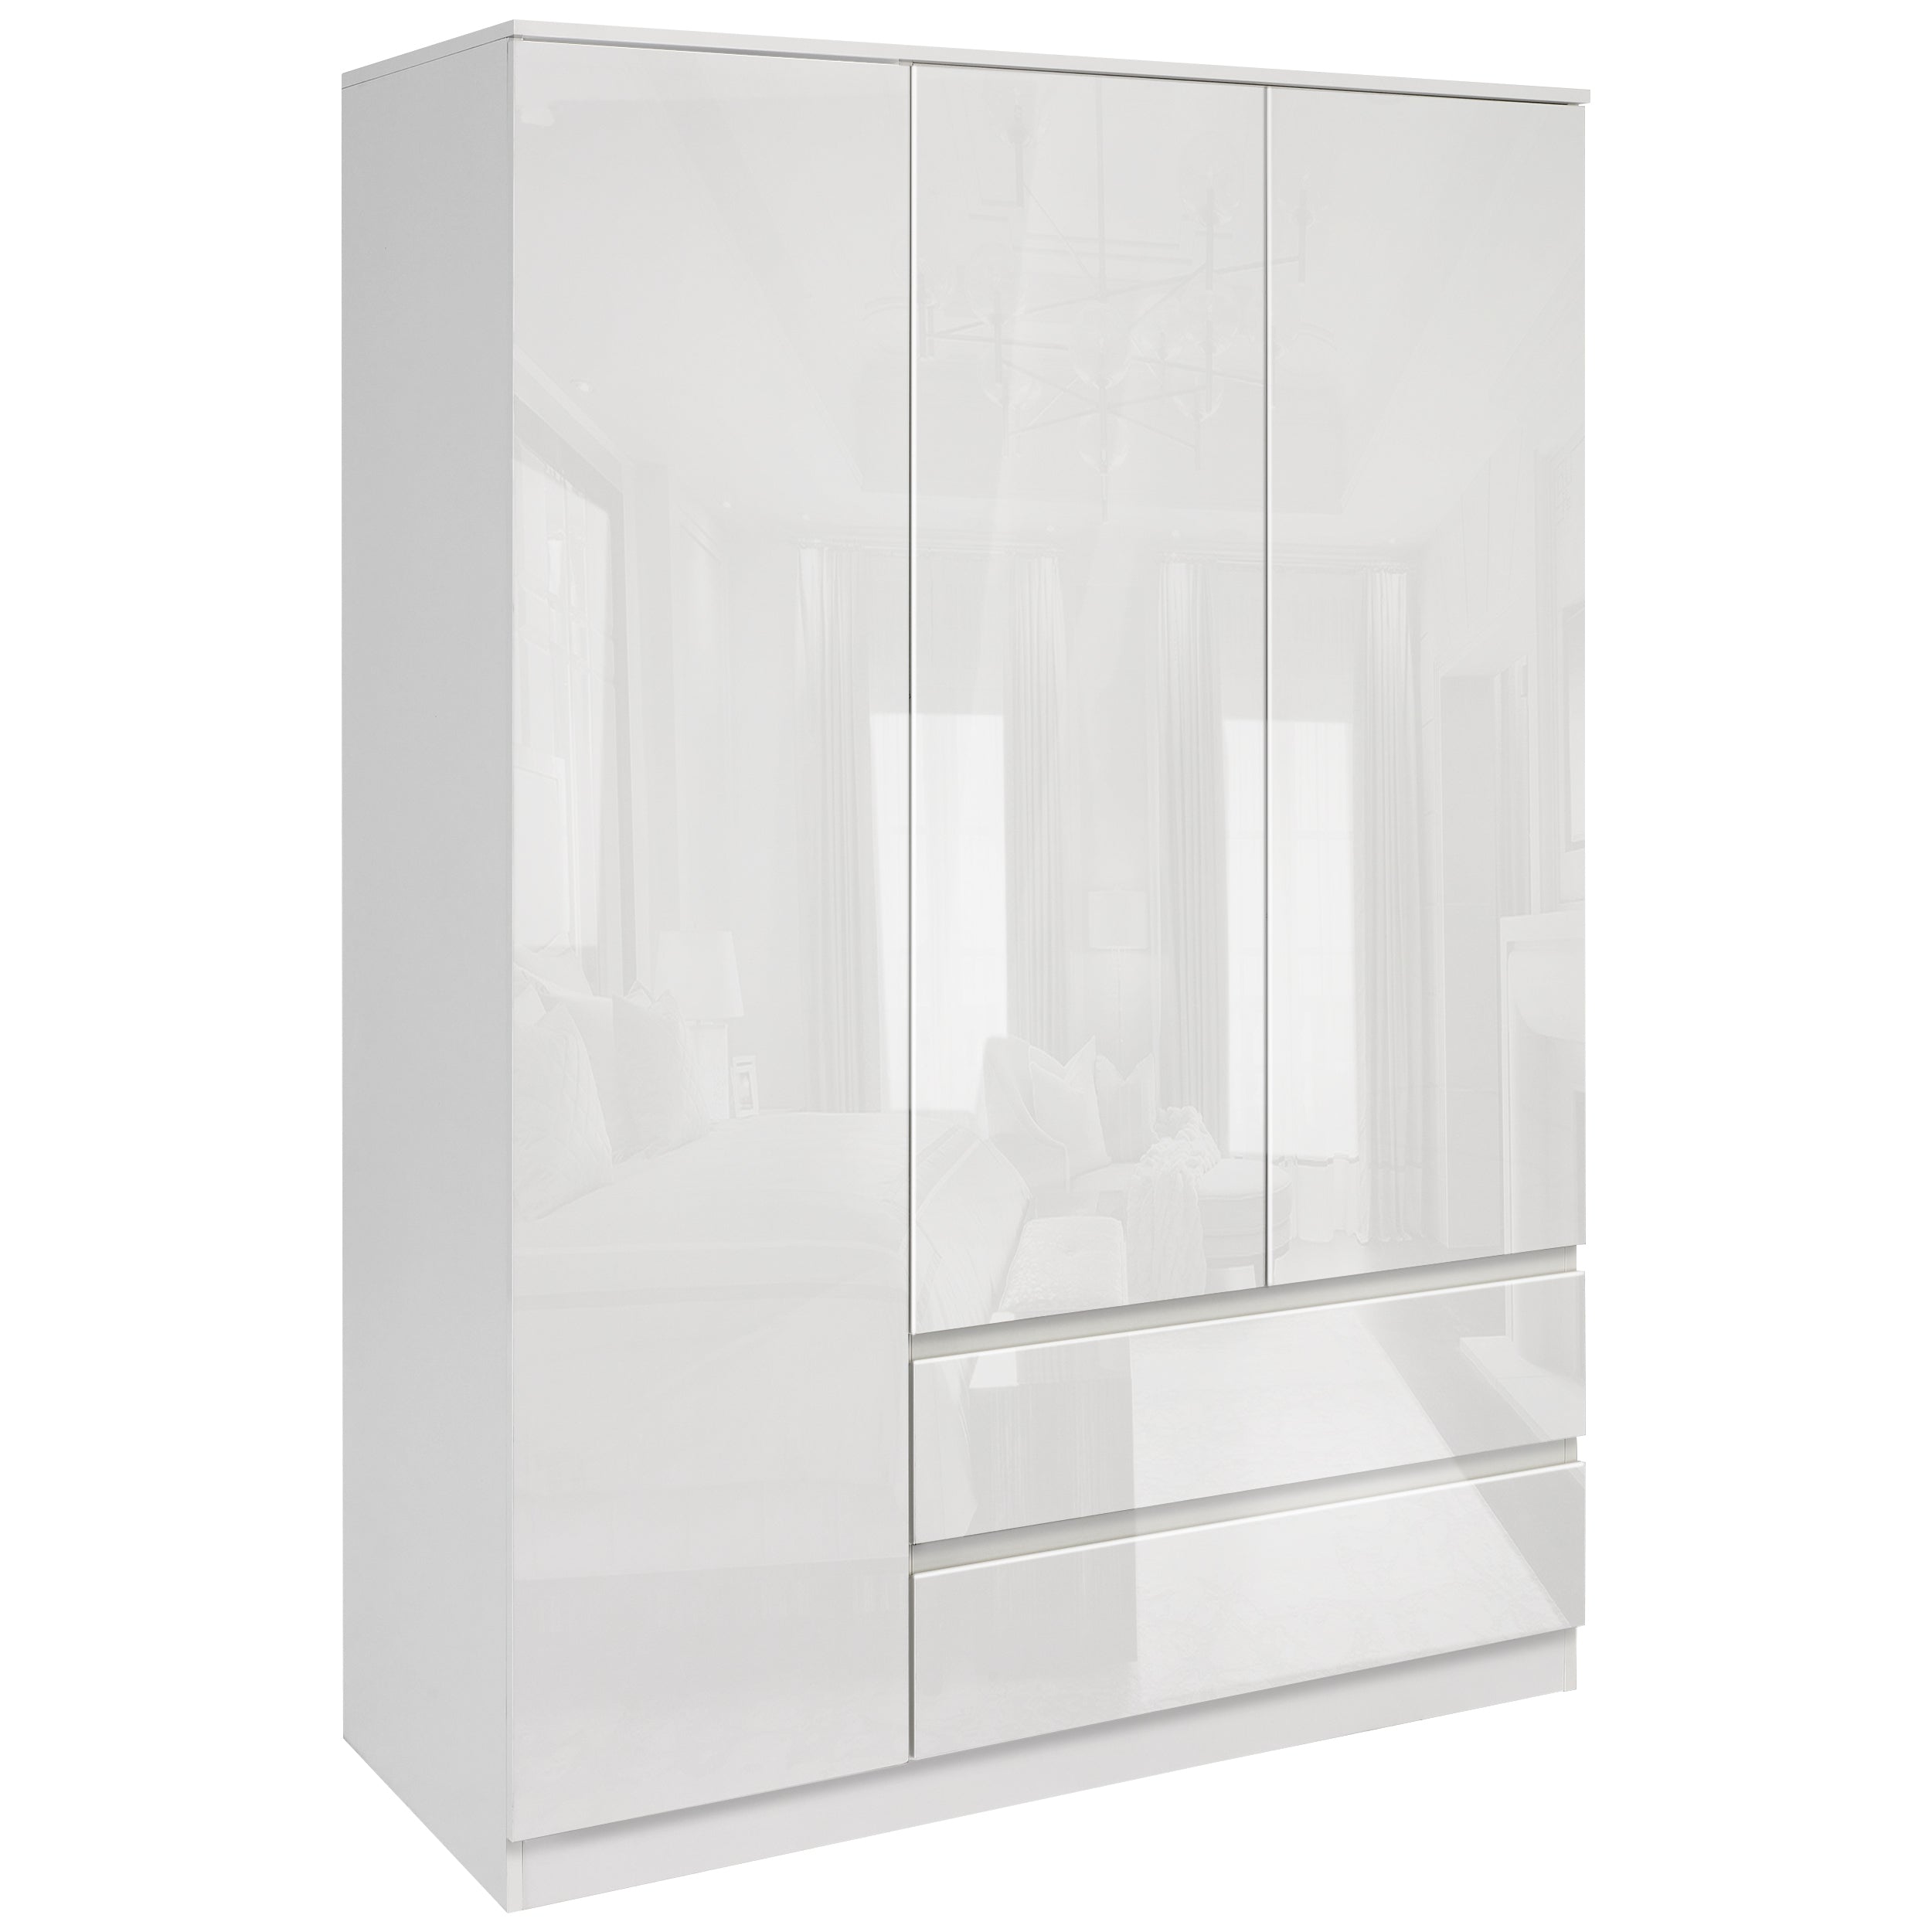 Blisswood High Gloss 3 Door Wardrobe and 8 Drawer Chest Bedroom Set